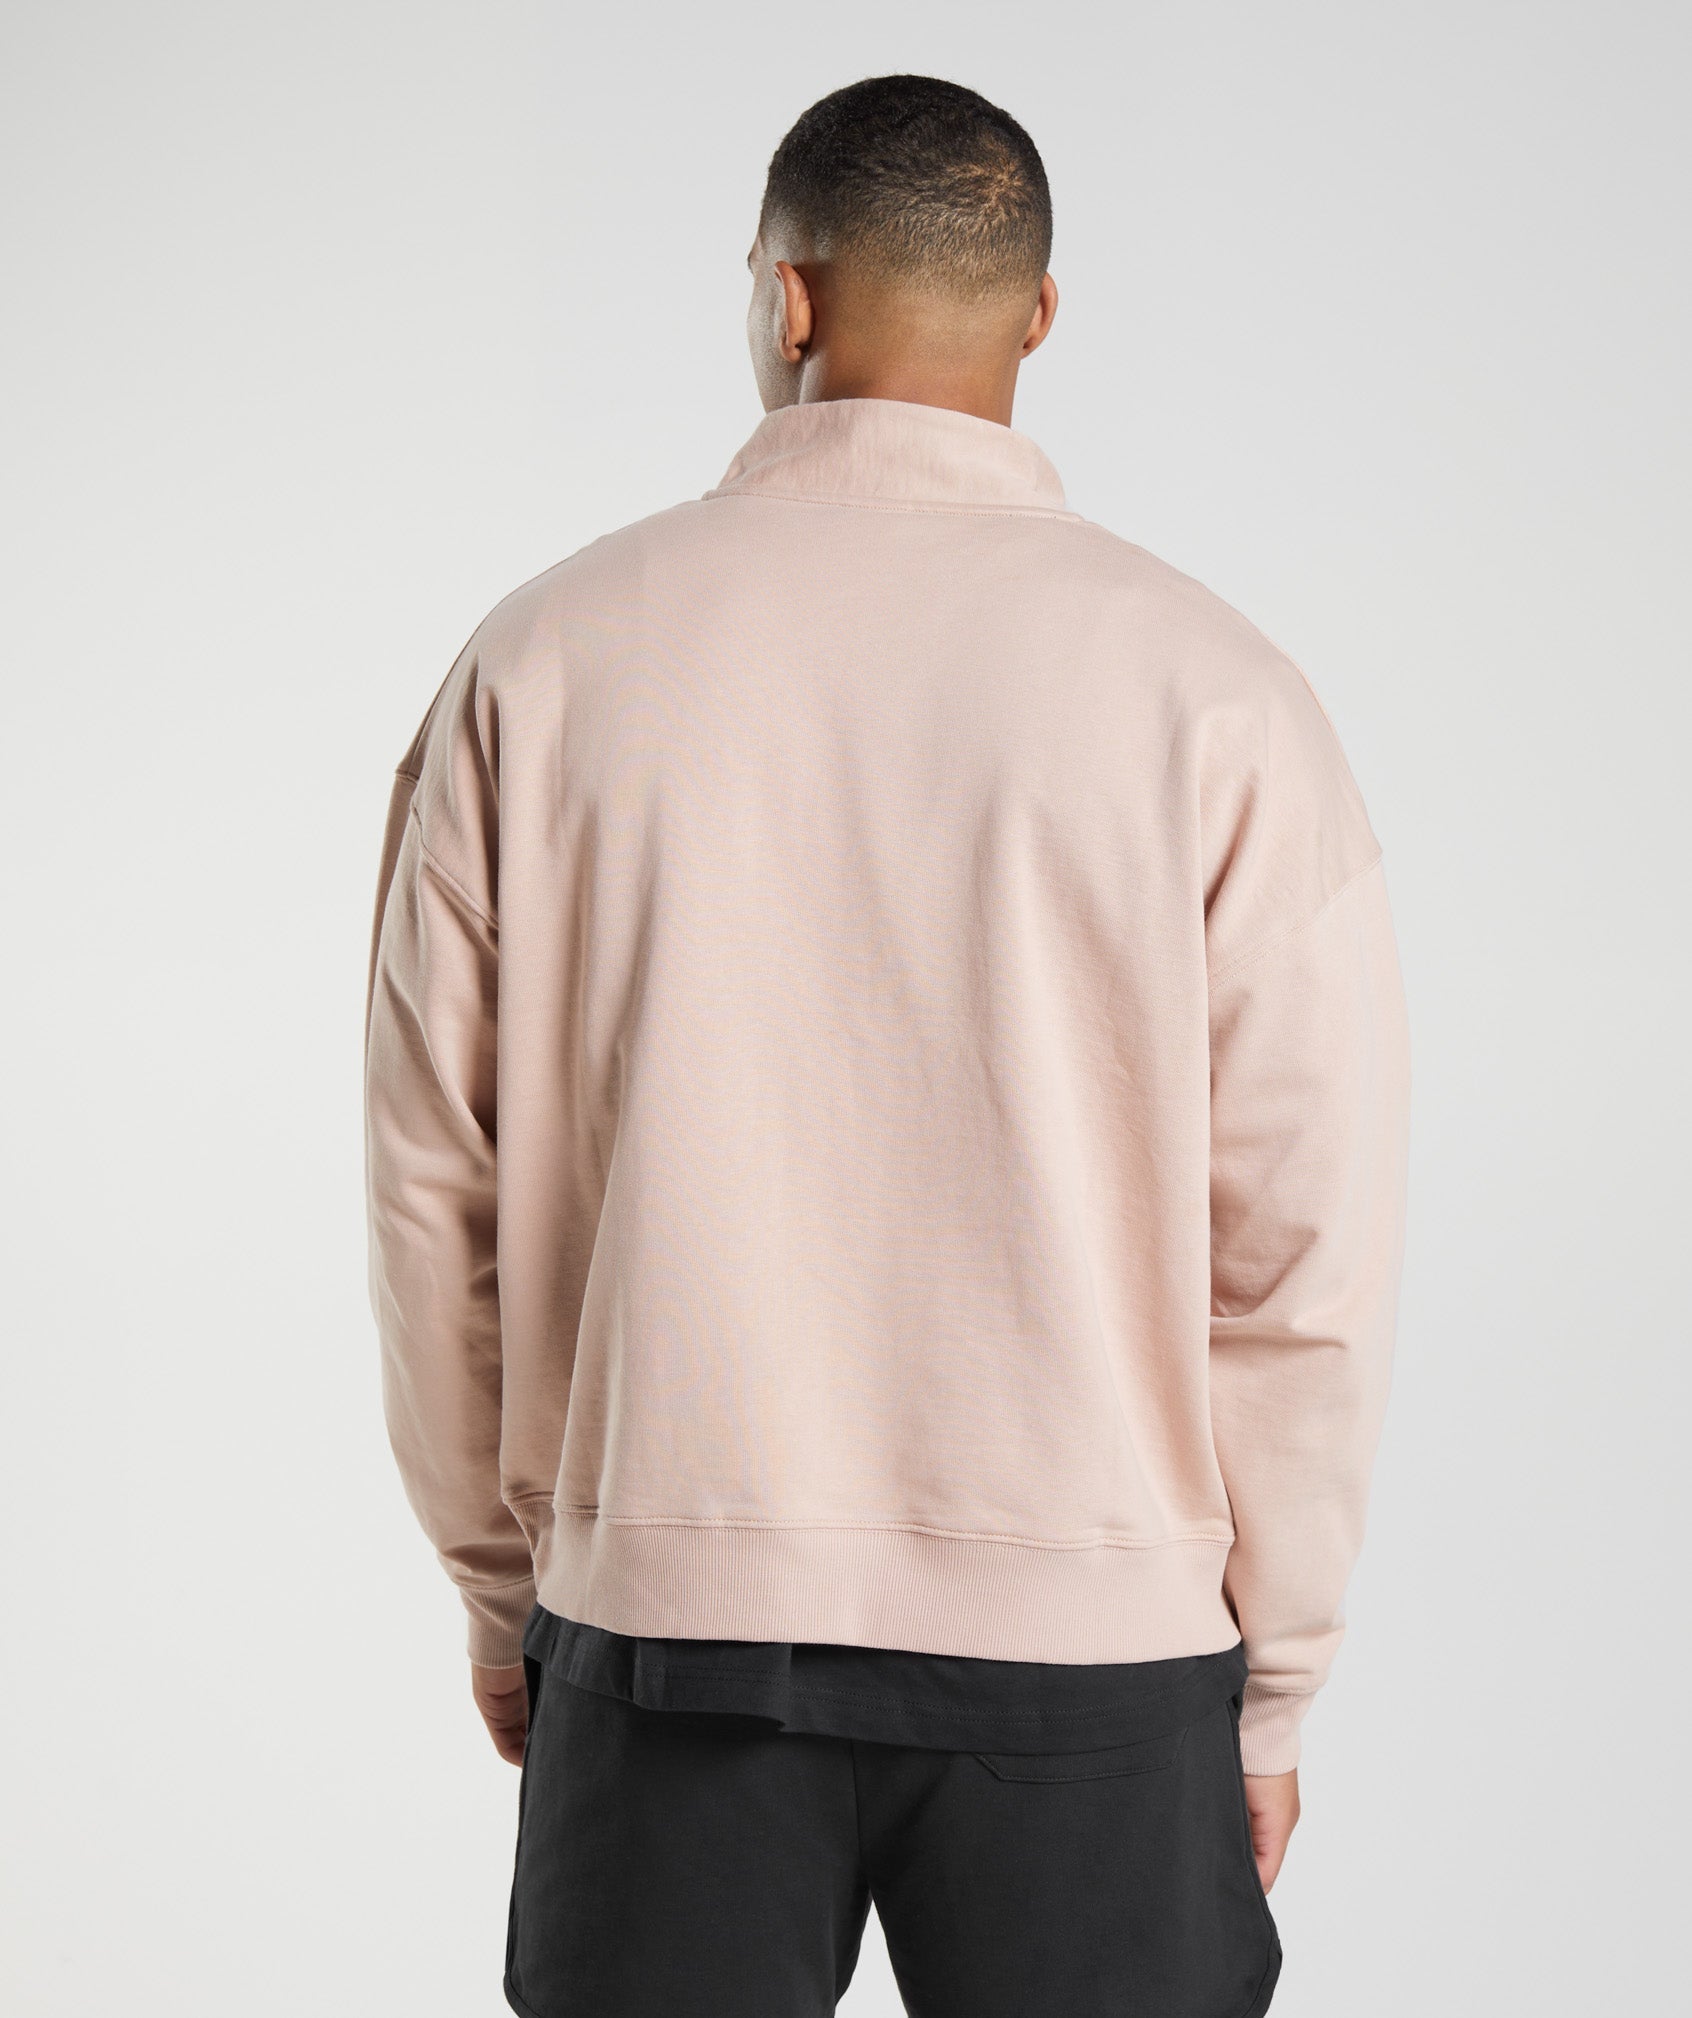 Rest Day Sweats 1/4 Zip in Dusty Taupe